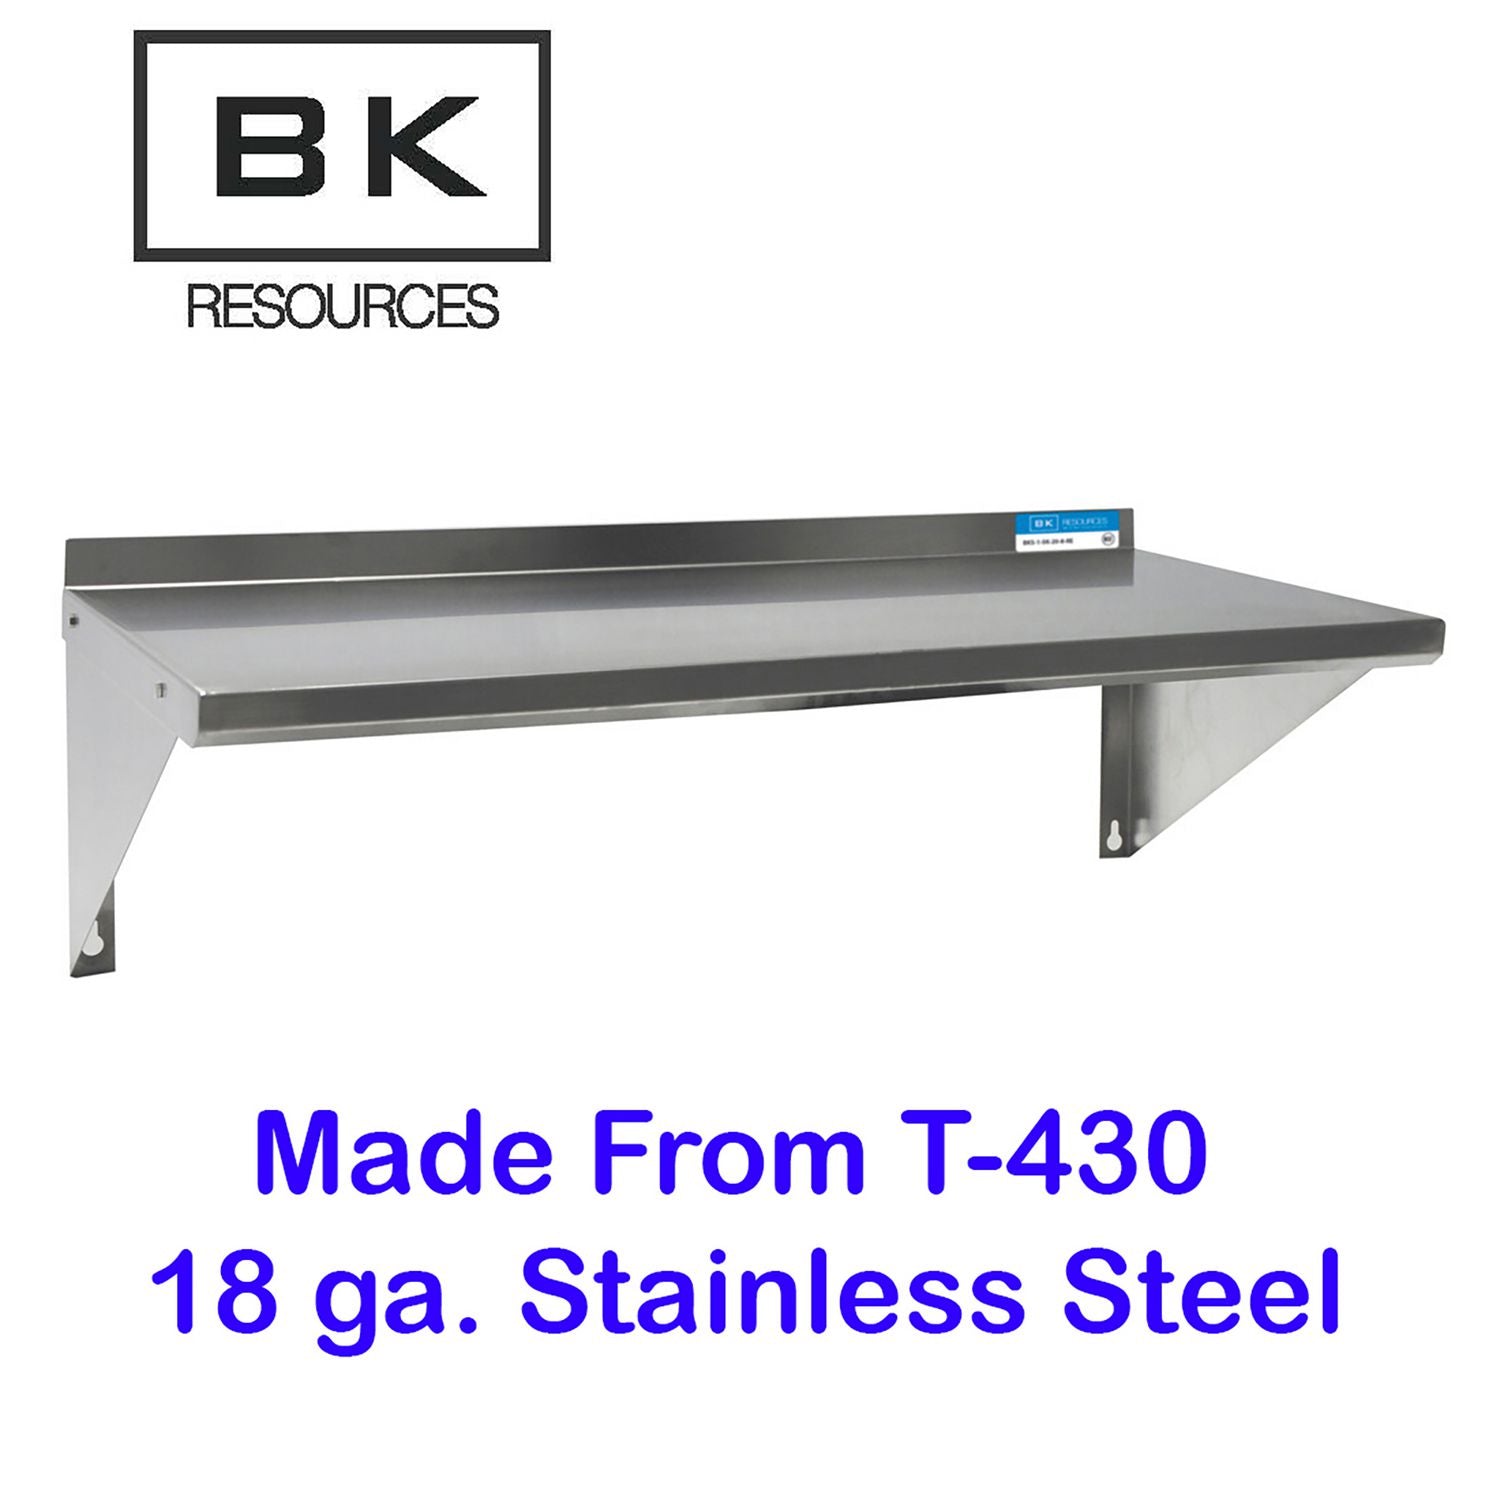 stainless-steel-economy-overshelf-60w-x-16d-x-115h-stainless-steel-silver-2-pallet-ships-in-4-6-business-days_bke2wse1660 - 3